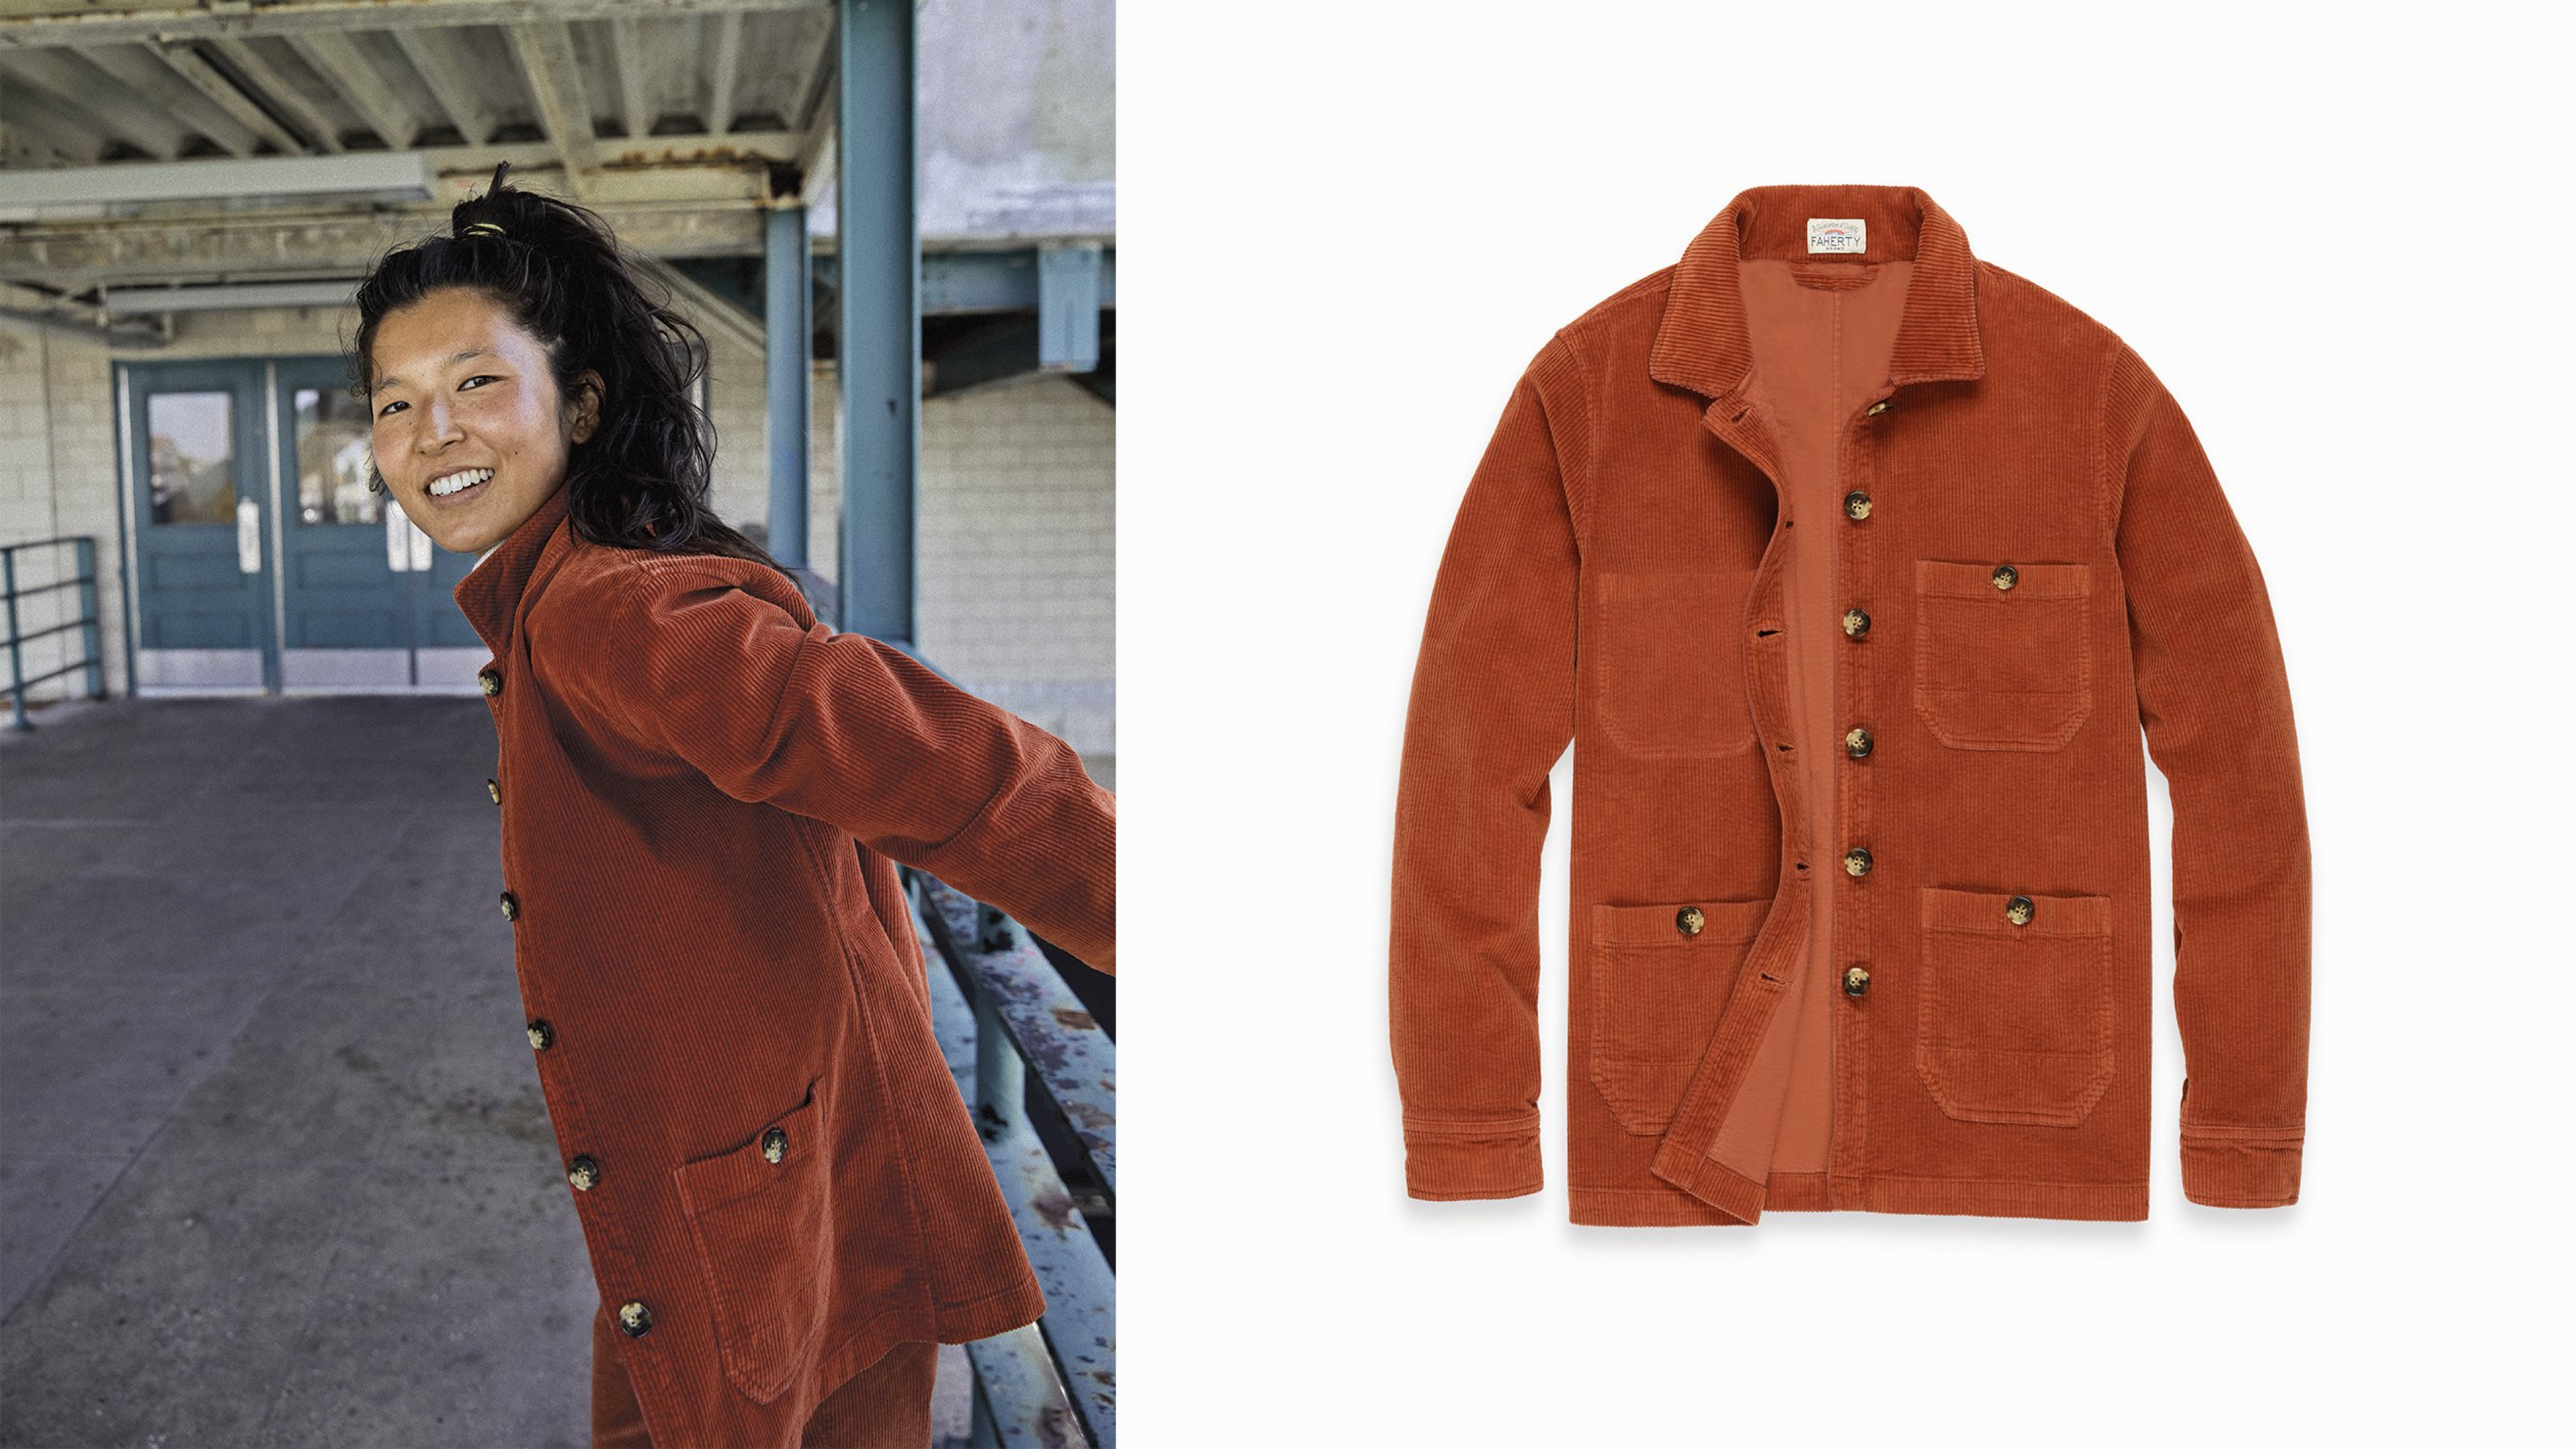 corduroy spring jacket with pockets in a gingerbread color